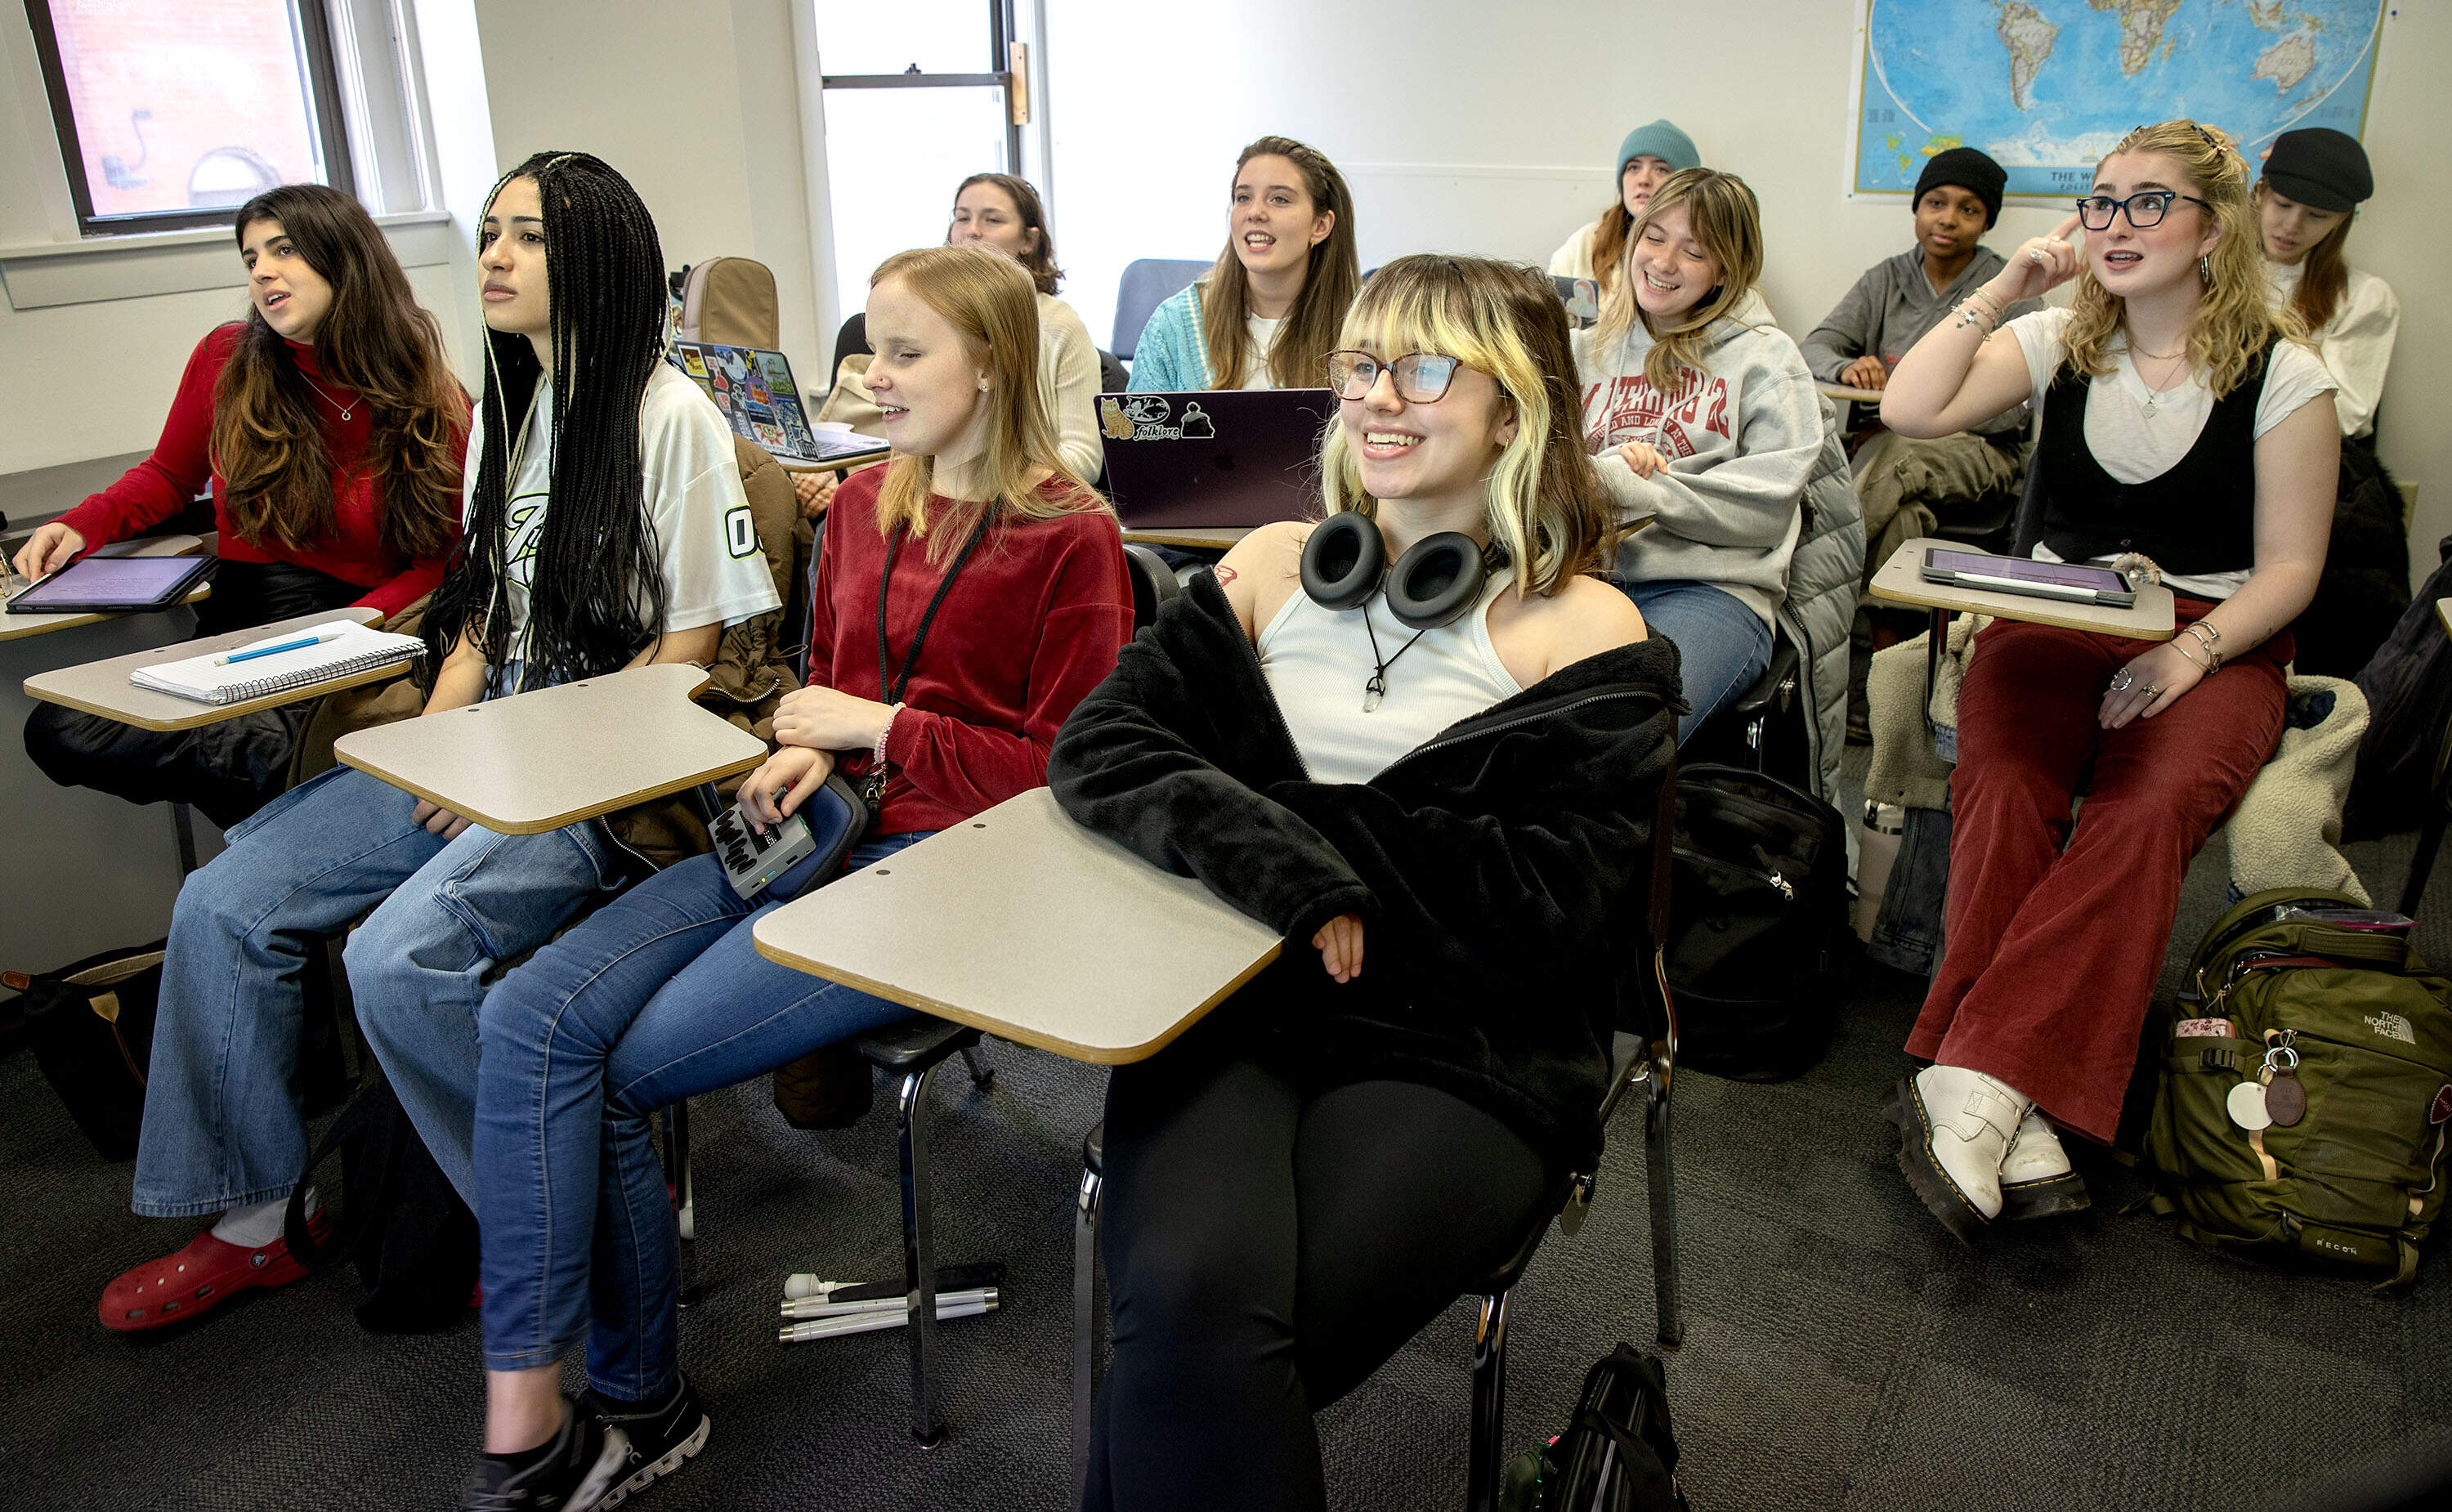 A Taylor Swift course at Harvard University garnered buzz when it launched last fall. Scarlet Keys’ class at Berklee College of Music, pictured, debuted that semester, too, and was popular enough that she offered two sections in the spring — and will offer three next semester. (Robin Lubbock/WBUR)